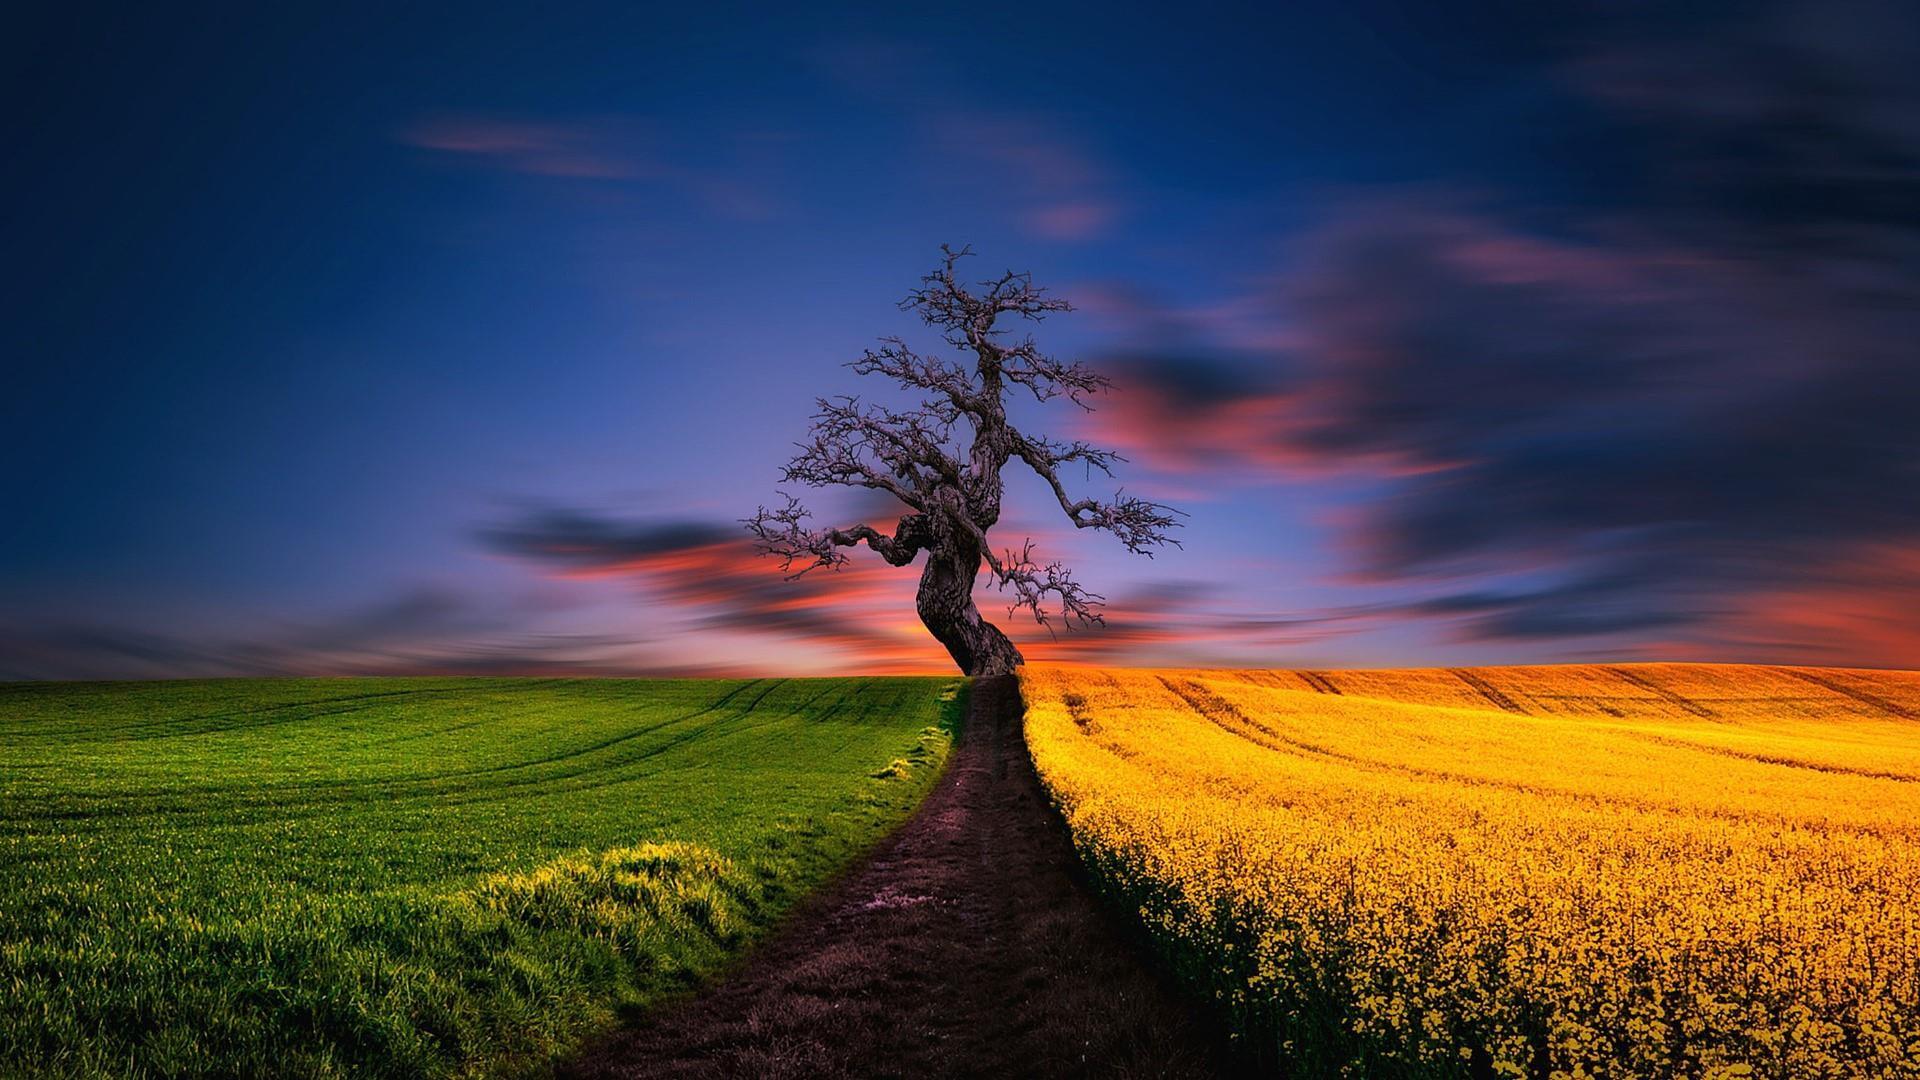 The Lonely Tree by Nicholas Halliday